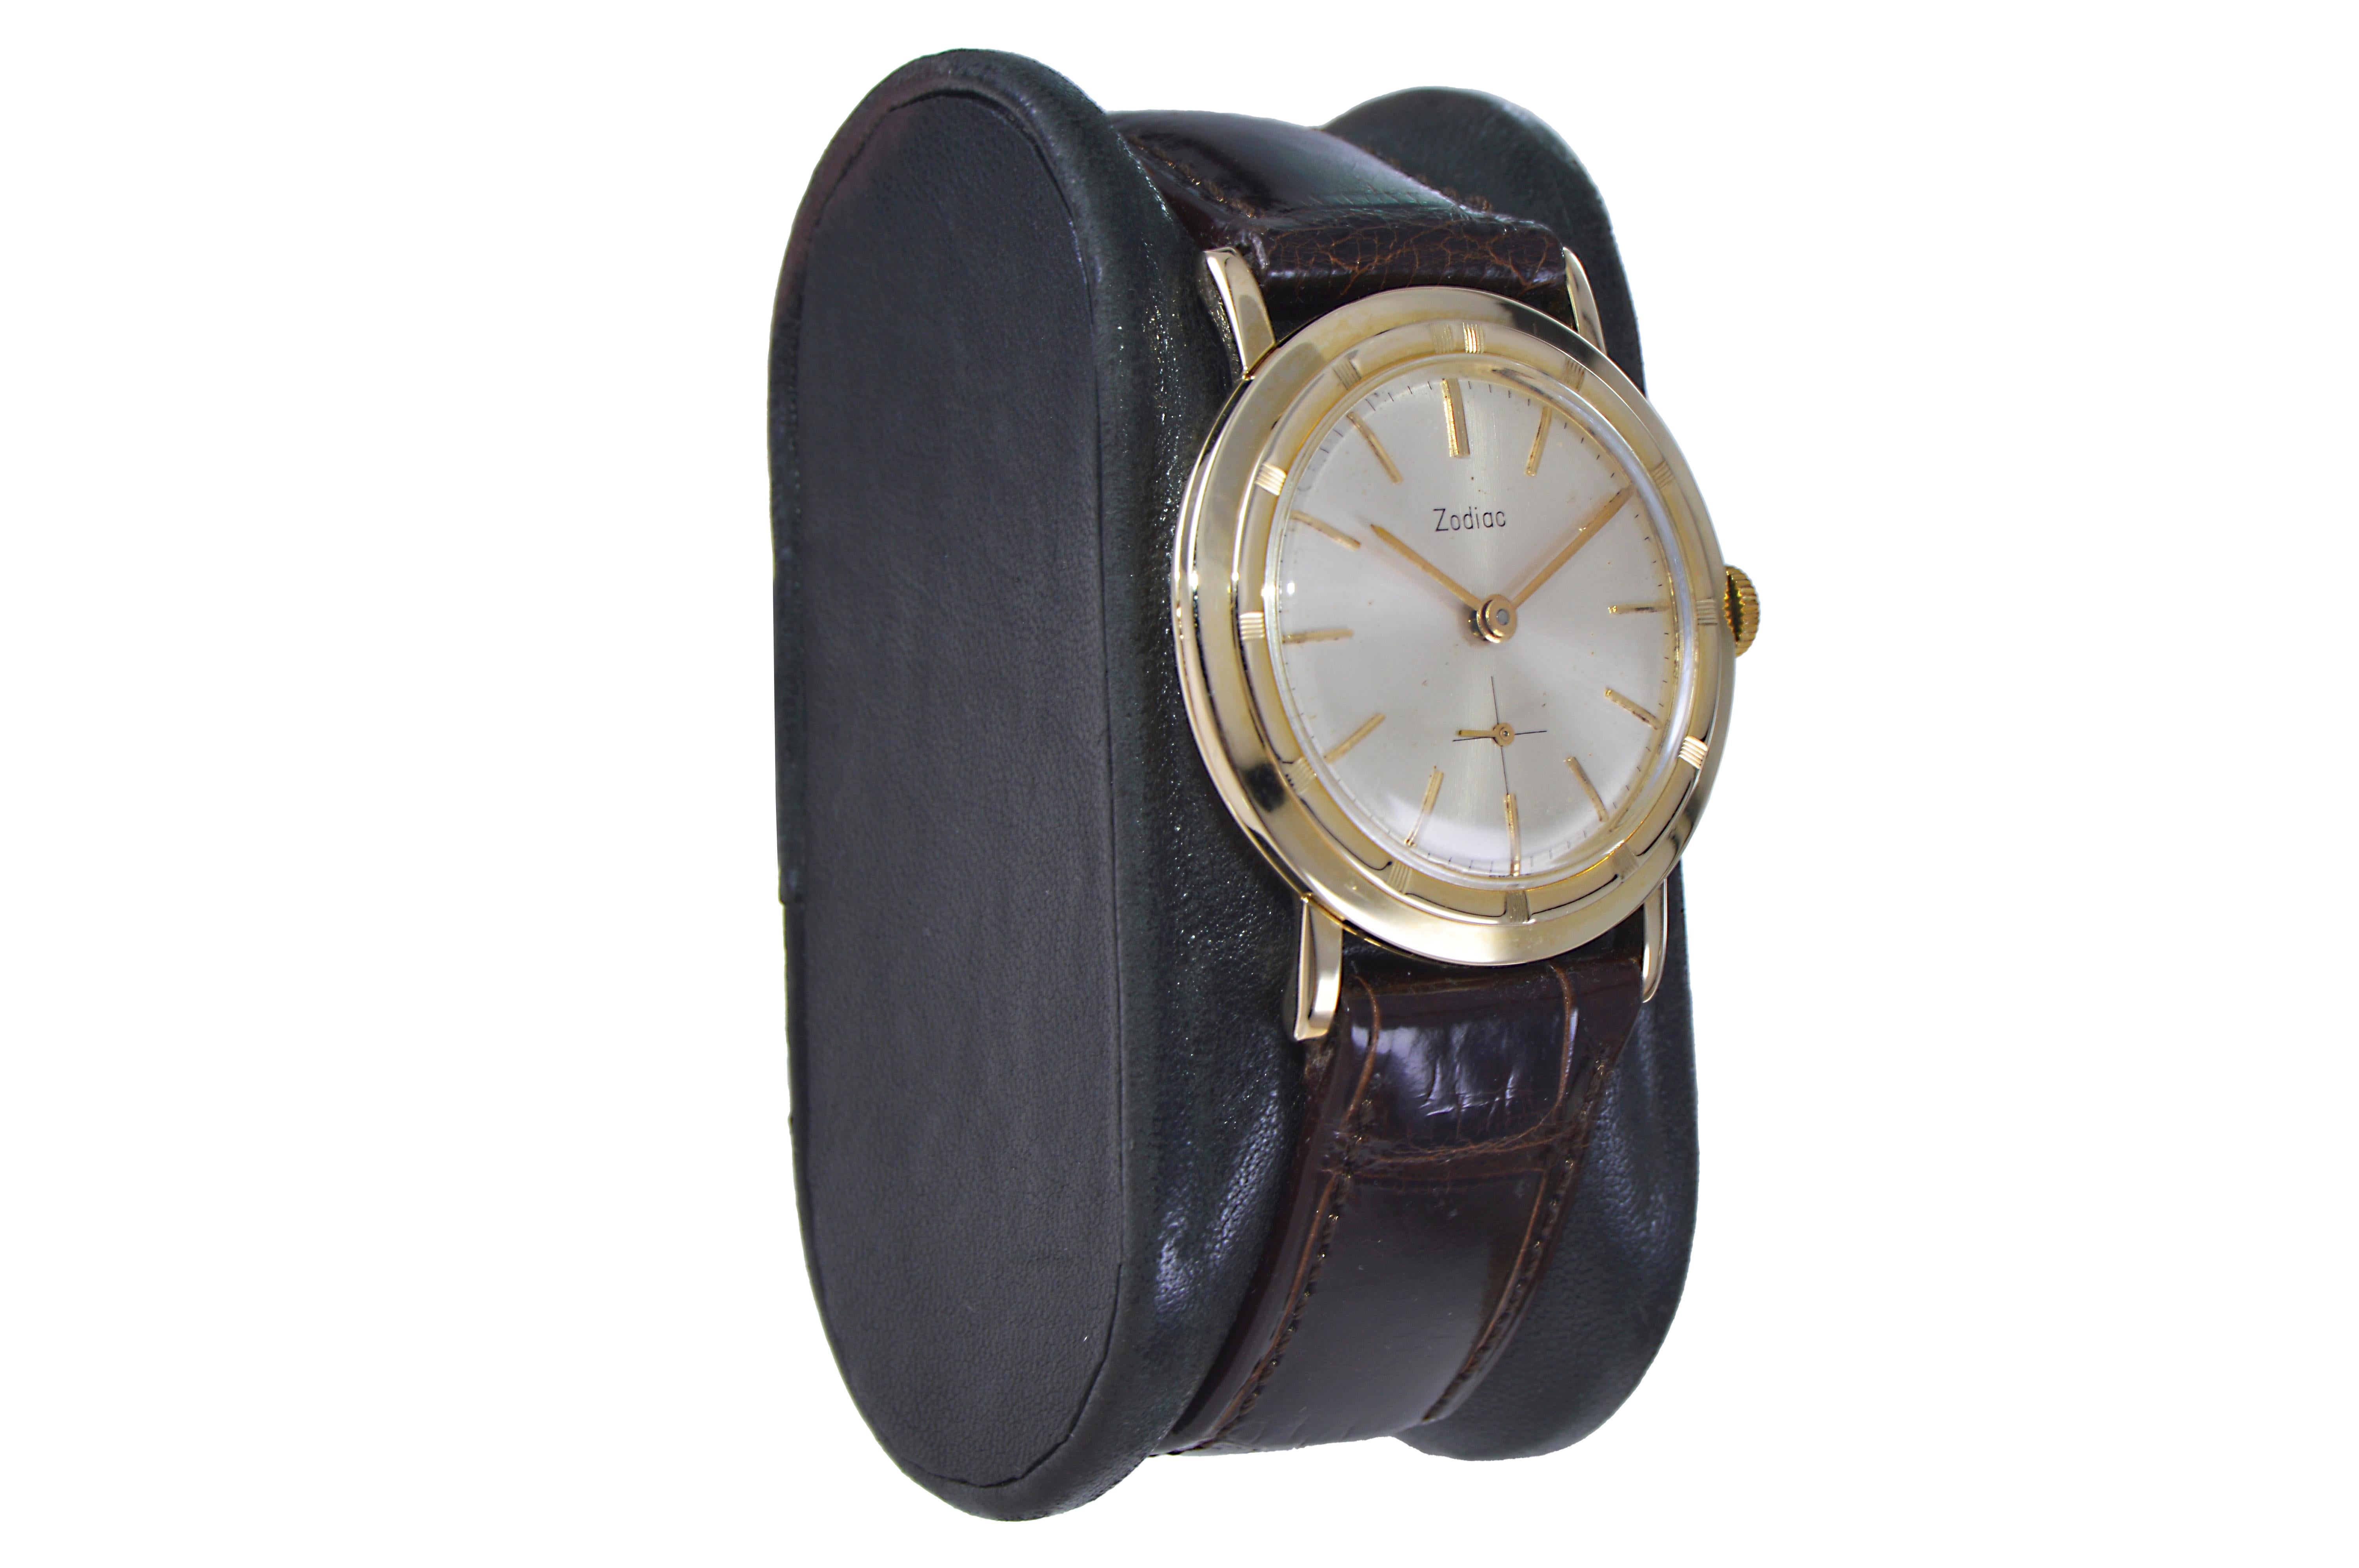 FACTORY / HOUSE: Zodiac Watch Company
STYLE / REFERENCE: Round / Moderne
METAL / MATERIAL: 14kt Yellow Gold
DIMENSIONS:  Length 37mm  X  Diameter 32mm
CIRCA: 1950's
MOVEMENT / CALIBER: Winding / 17 Jewels / Cal.36 
DIAL / HANDS: Original / Silver